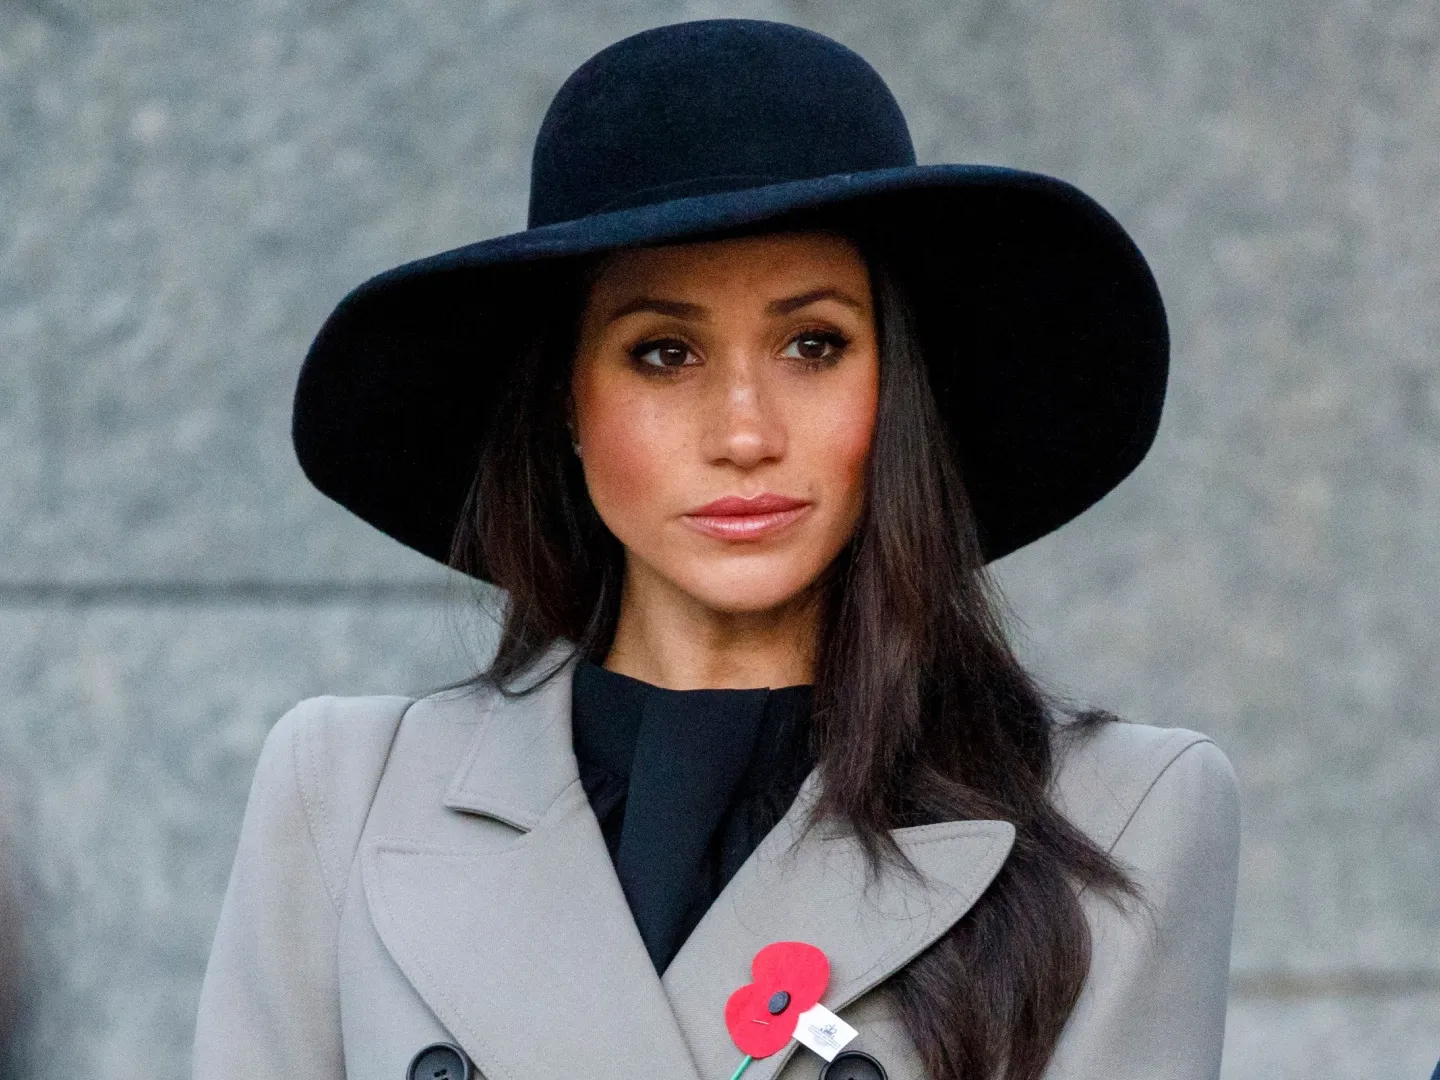 Meghan Markle is wearing a black hat and looking into the distance.